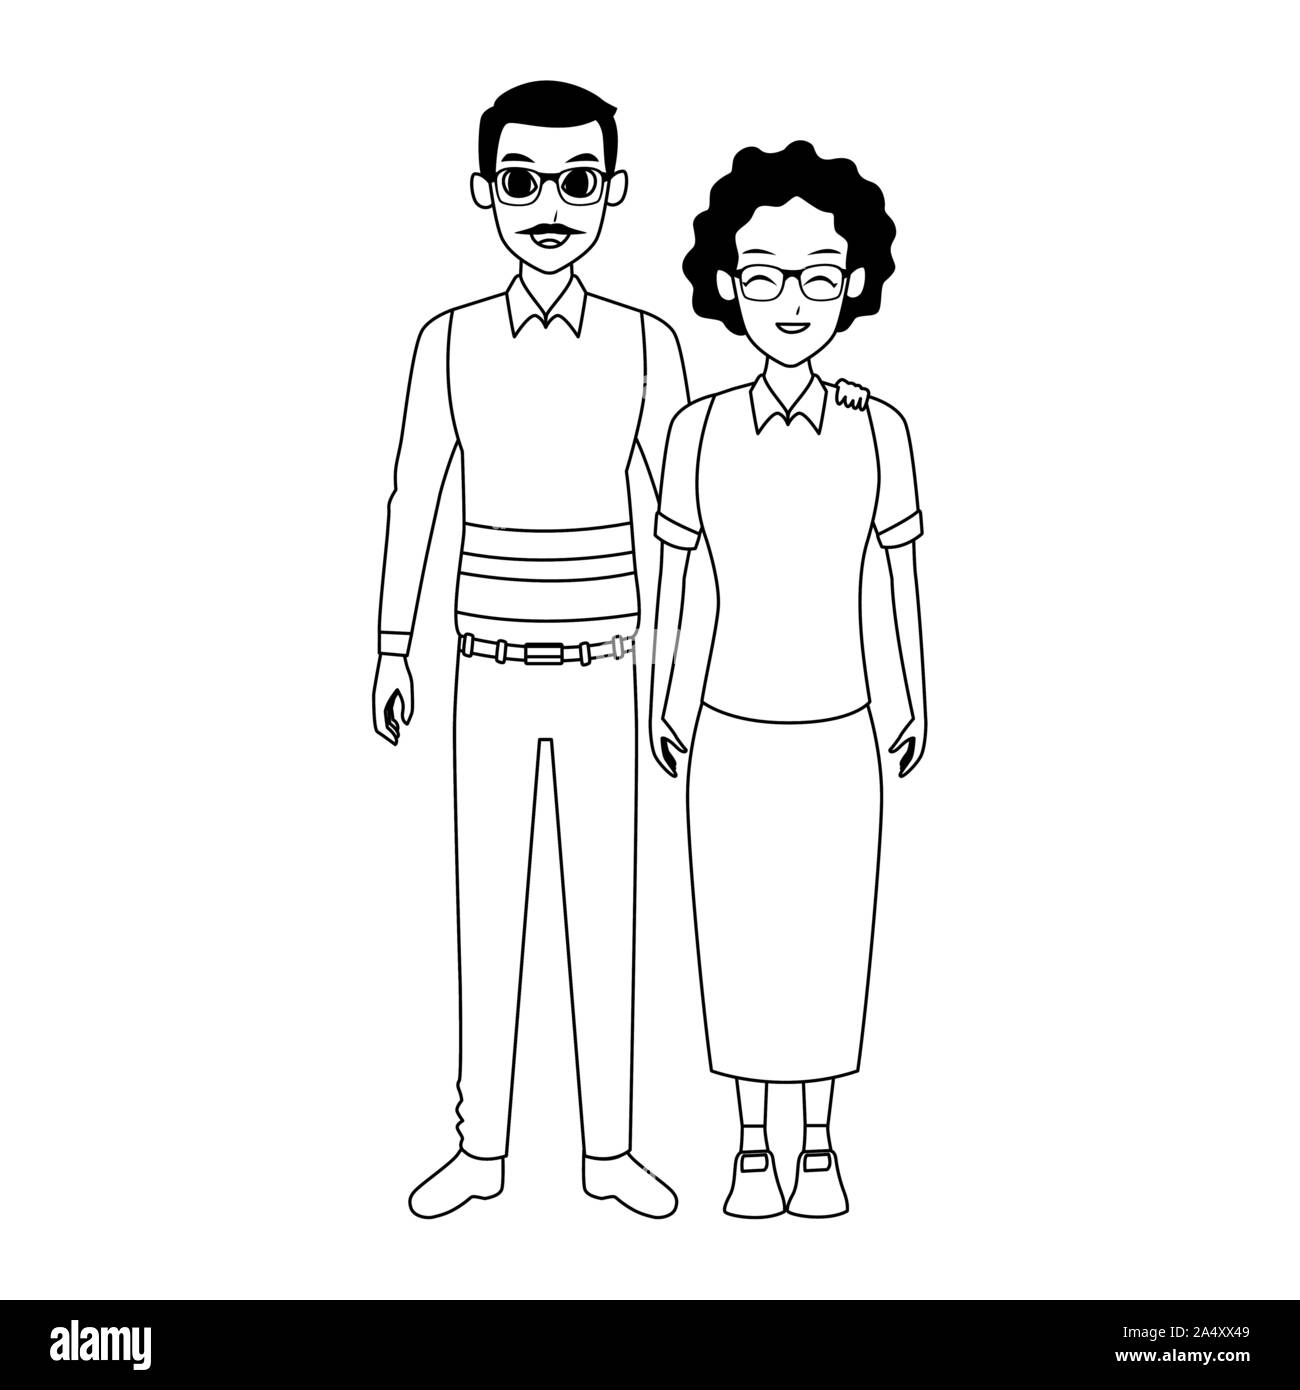 old couple standing icon image Stock Vector